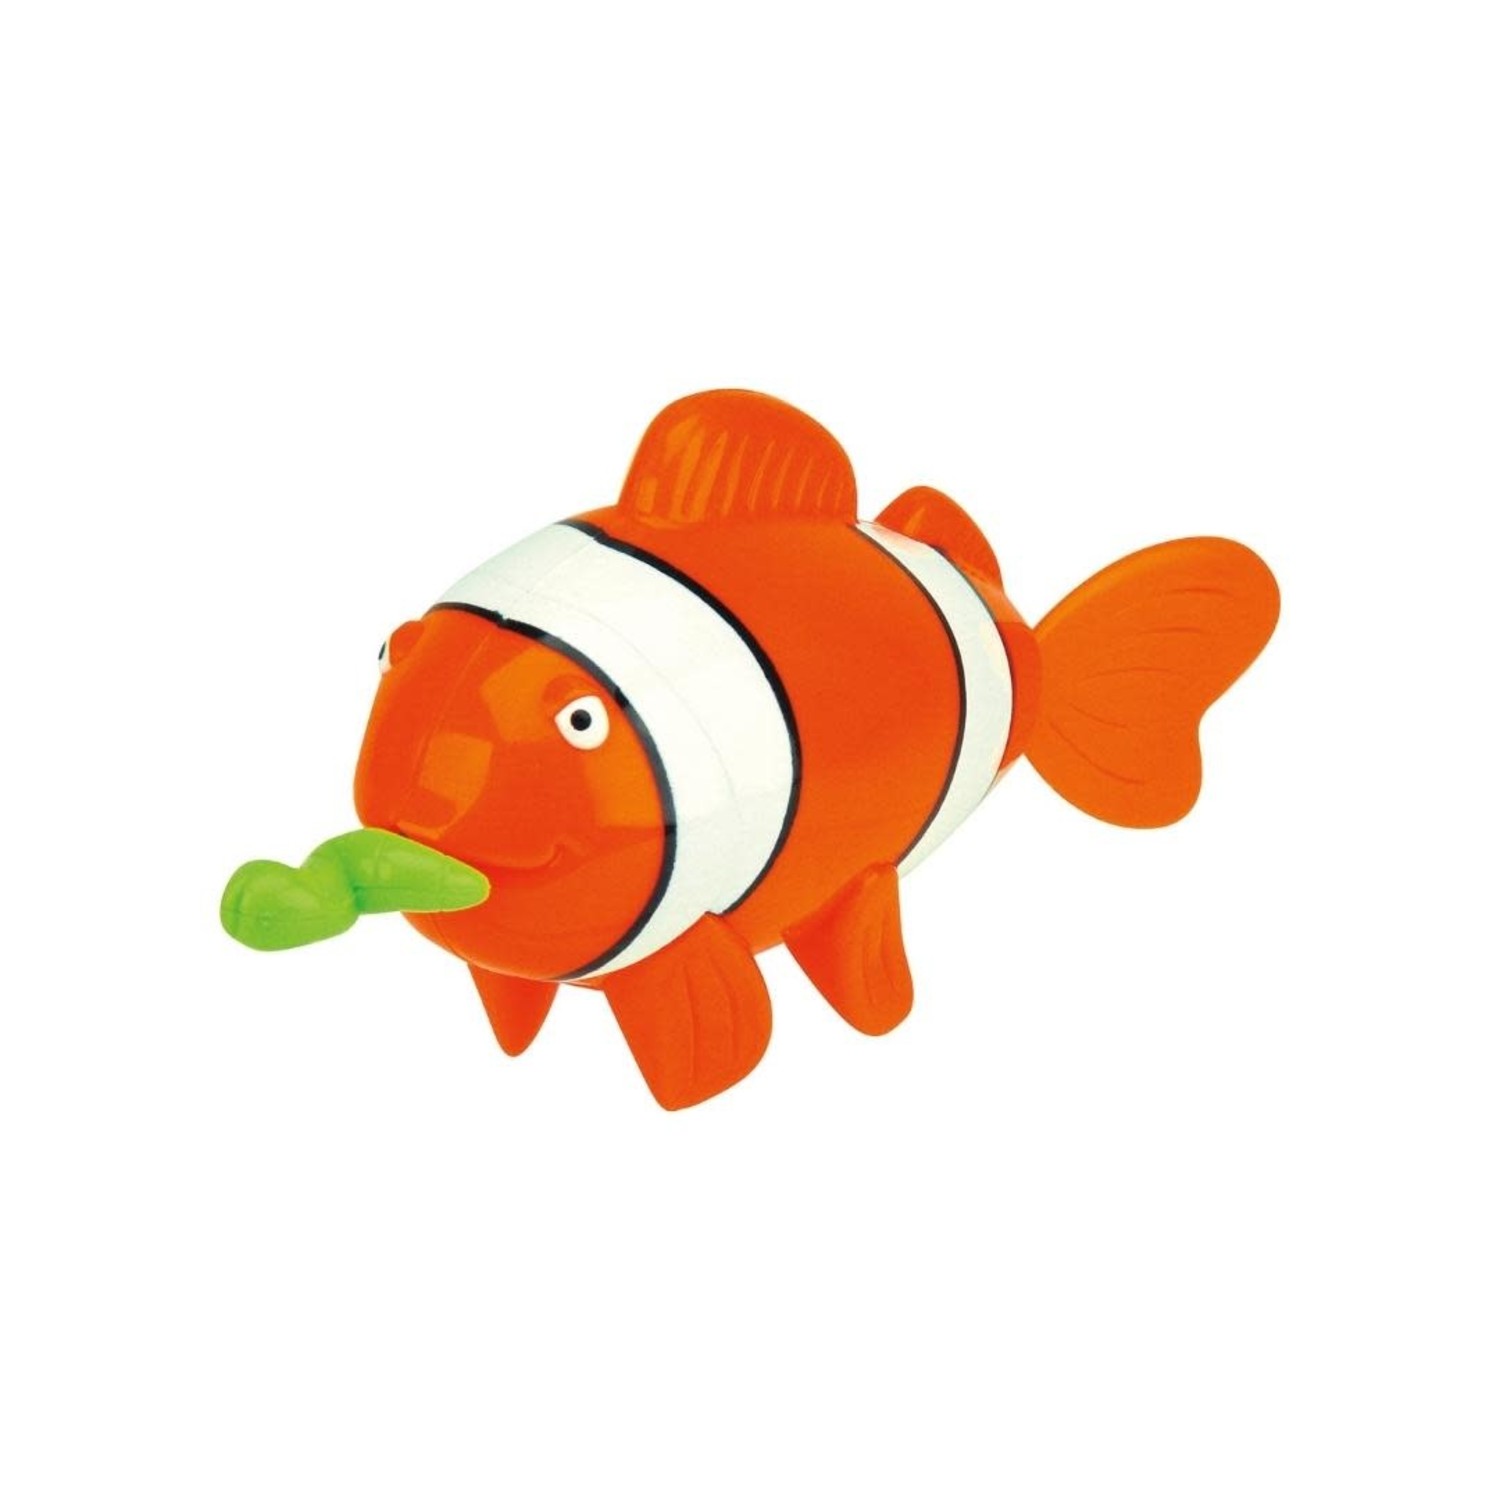 Pull String Clown Fish - Mudpuddles Toys and Books